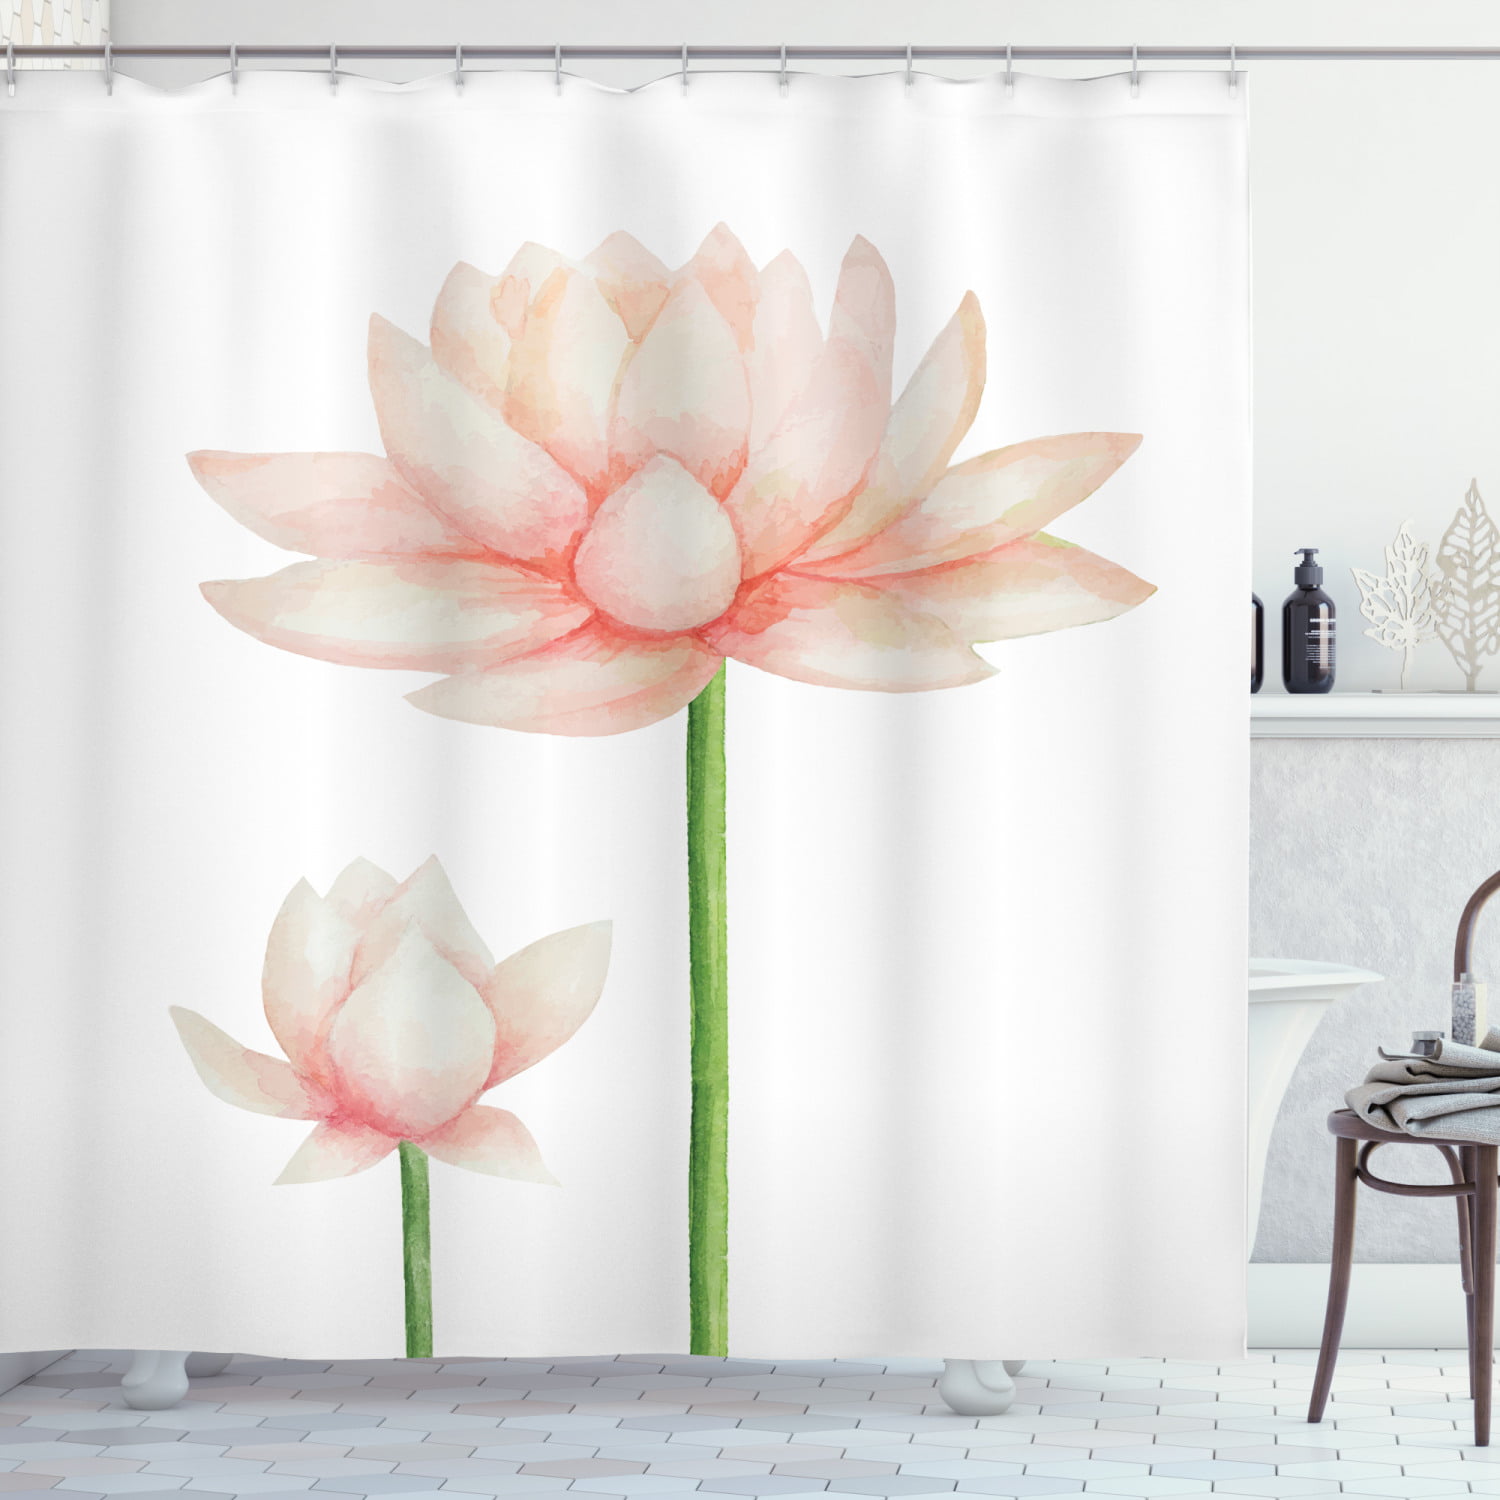 SPA Pink Lotus Flower Bathroom Shower Curtain Waterproof Fabric 71*71 inches New 